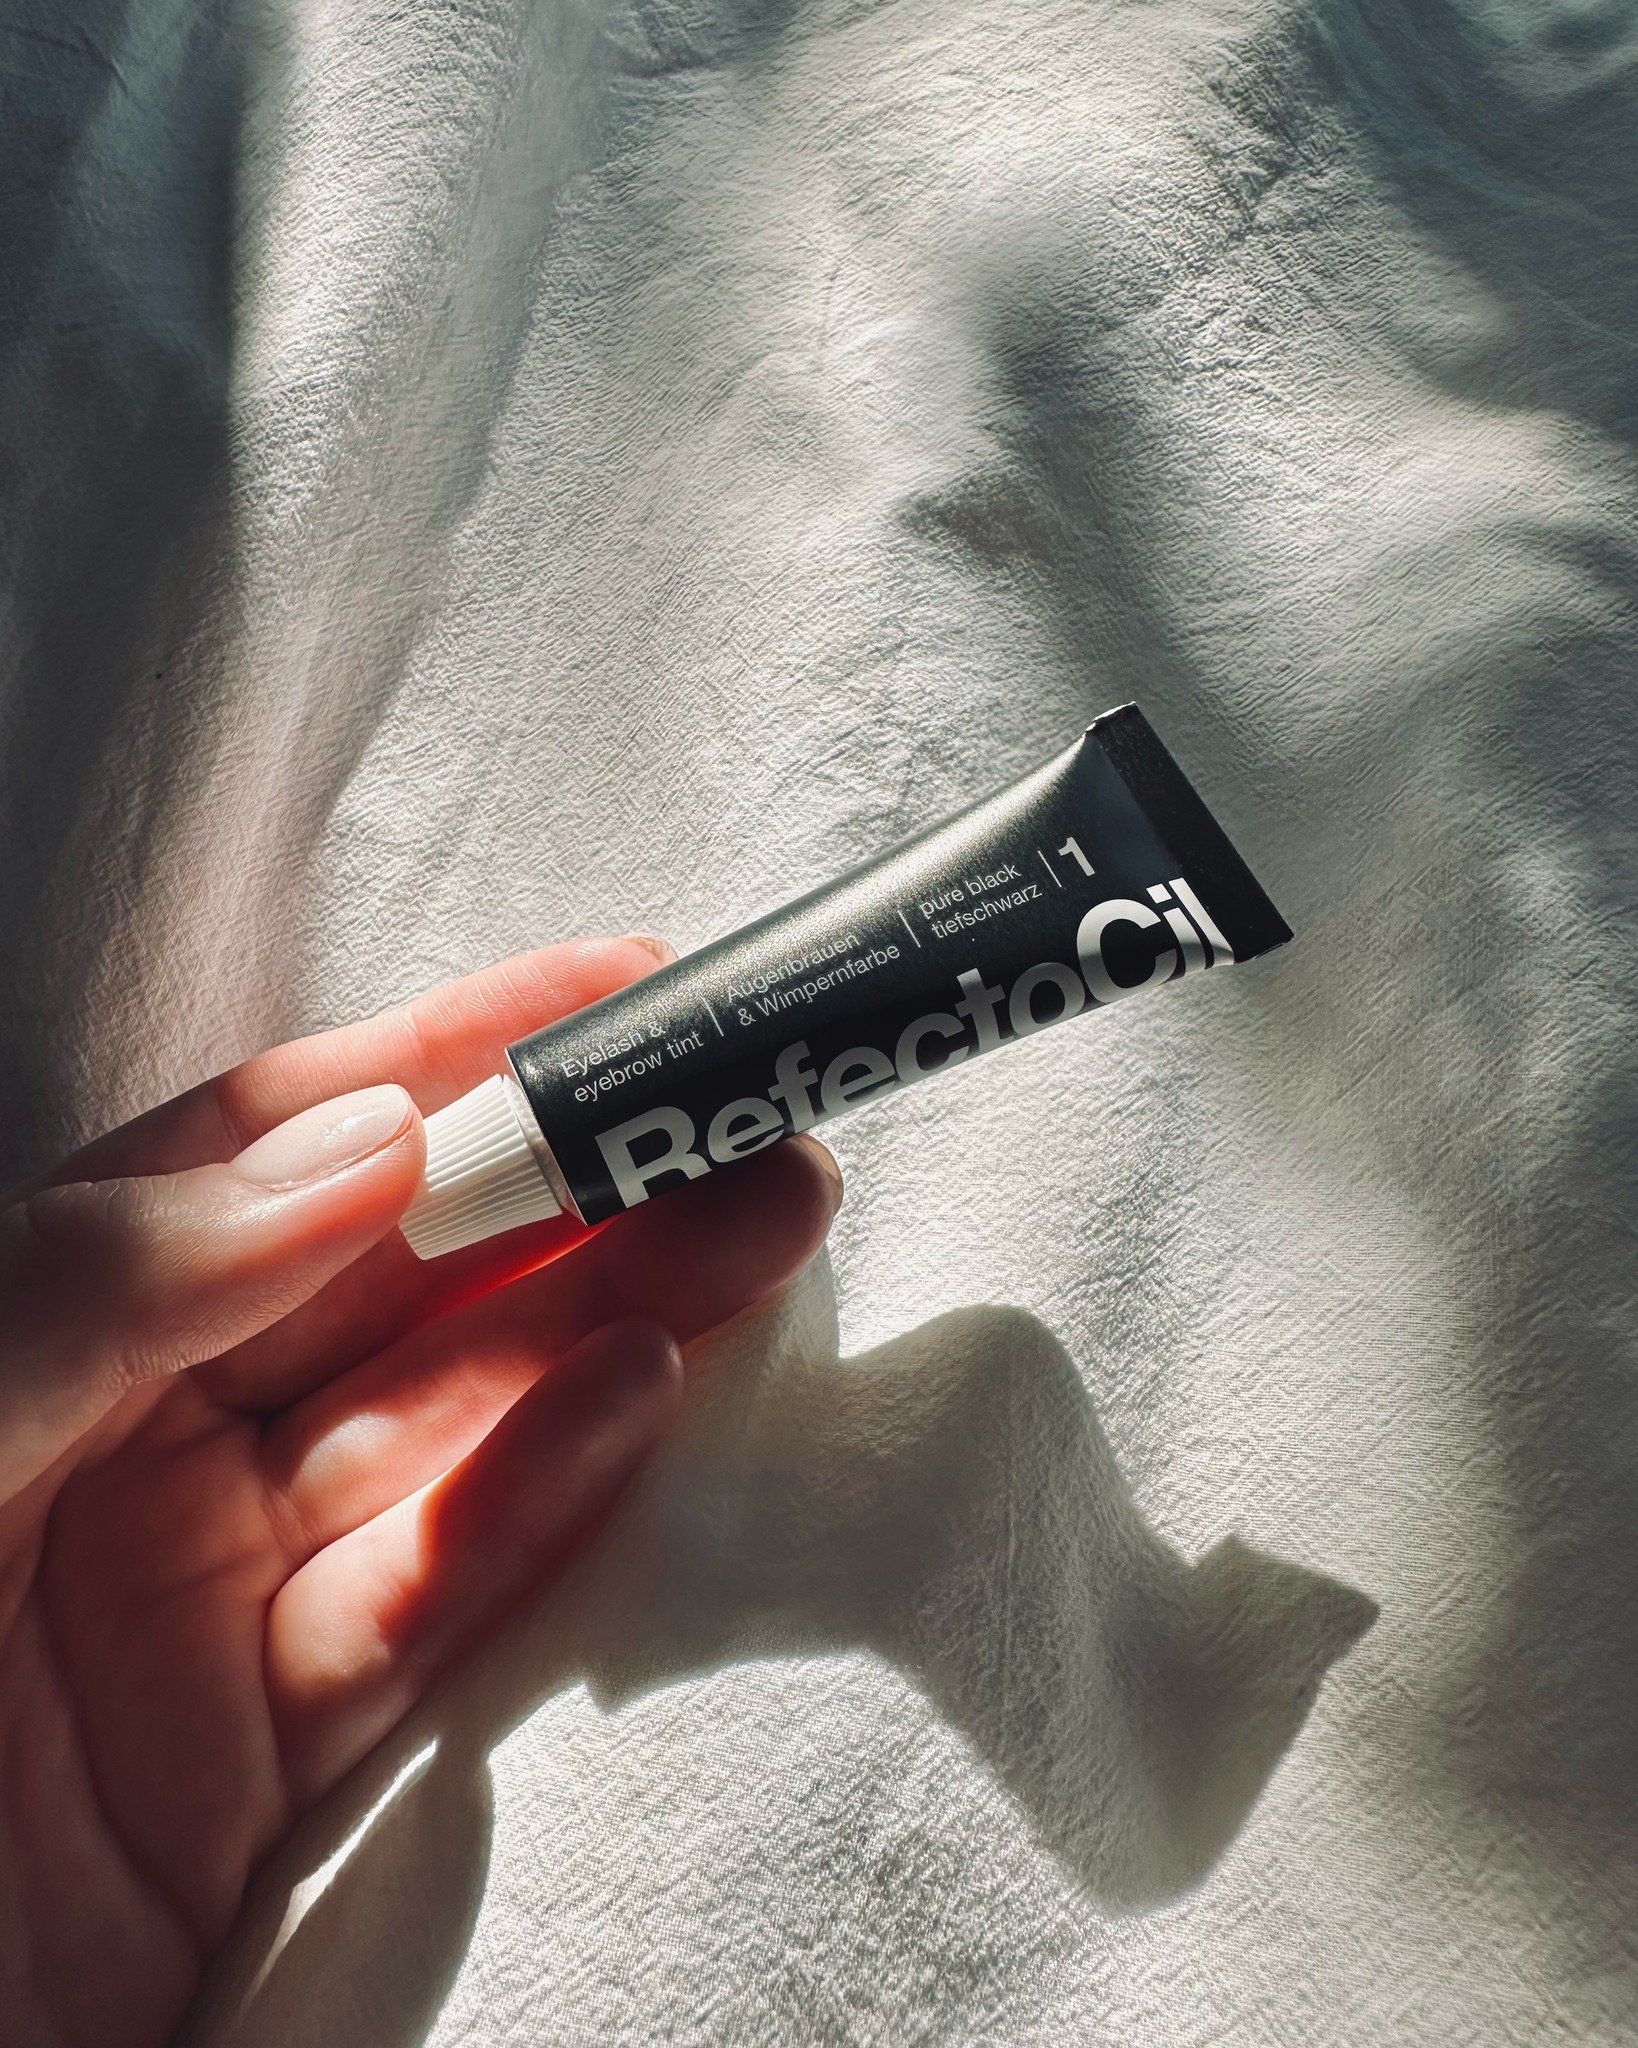 In case you needed a reminder...

Introducing our beloved Pure Black eyelash and eyebrow tint from our renowned oxidative tinting range. 💫 Whether you choose to use it alone or mix it with other shades, get ready to create your own custom colour lik